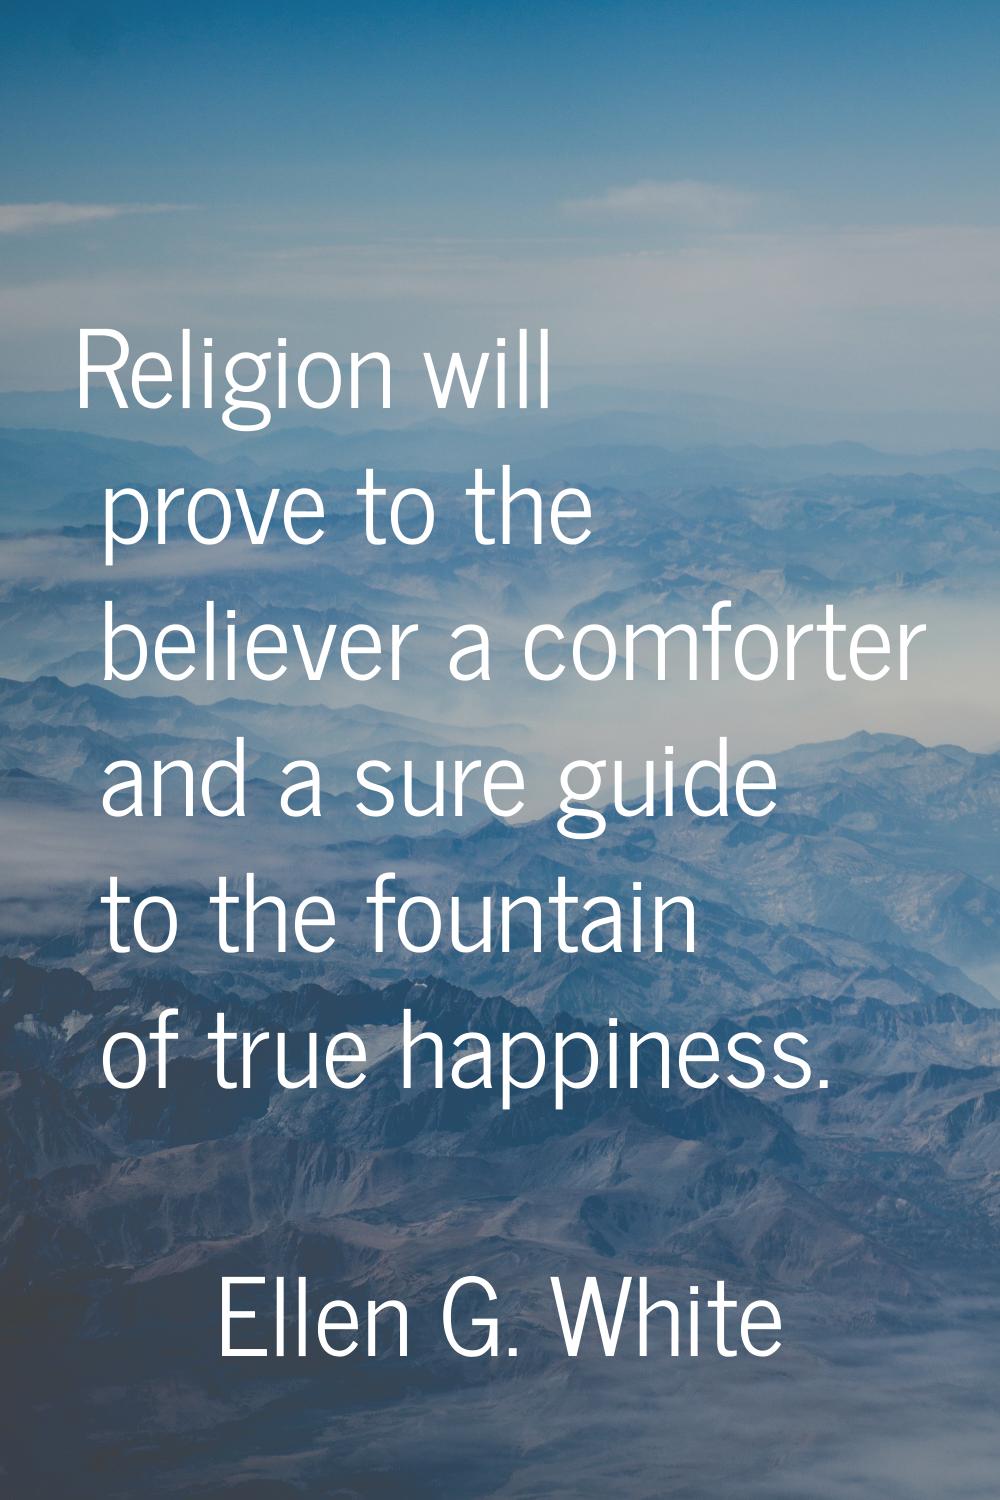 Religion will prove to the believer a comforter and a sure guide to the fountain of true happiness.